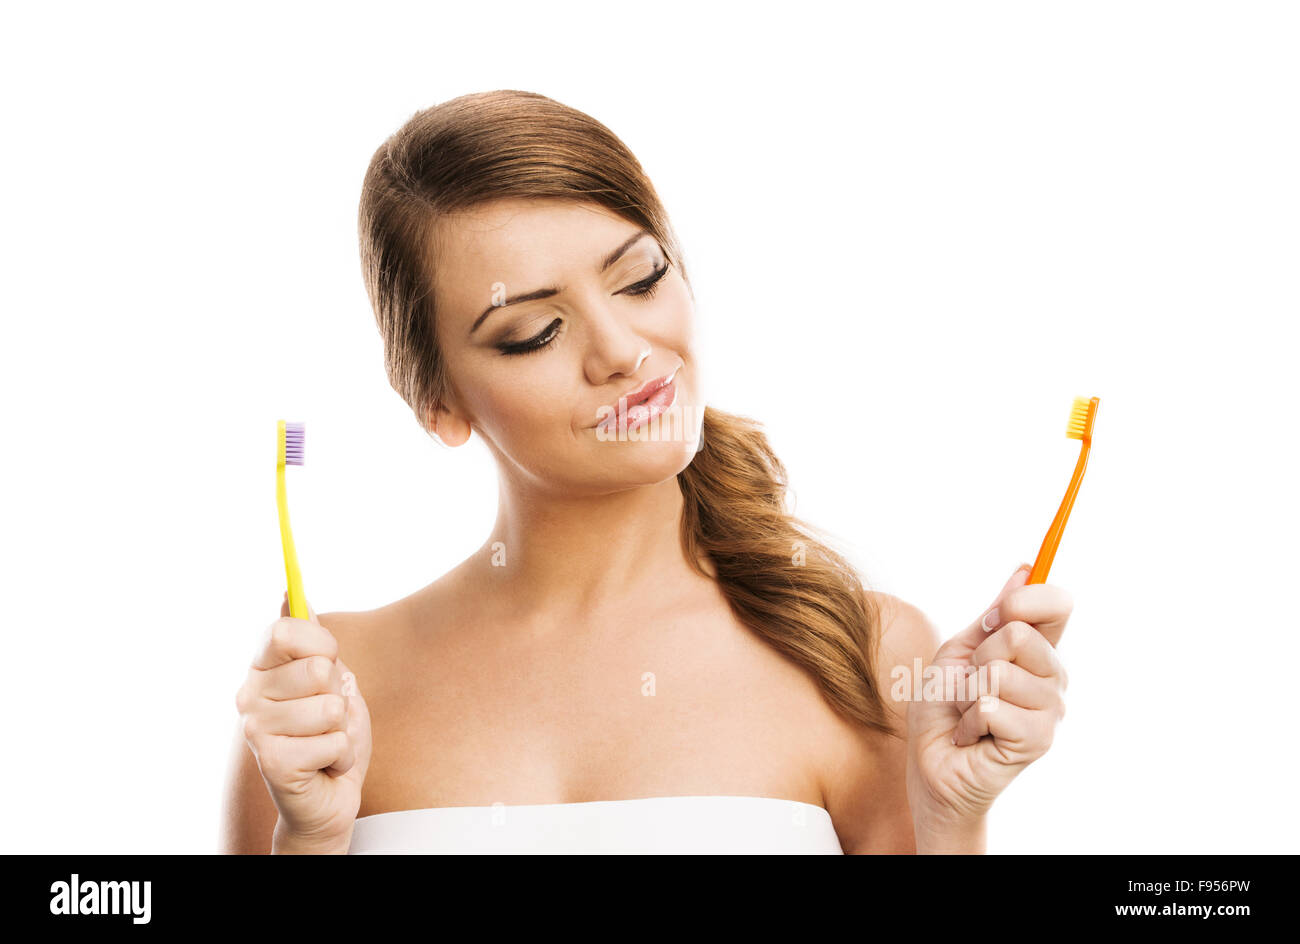 Beautiful Woman With Toothbrush Dental Care Portrait Isolated On White Background Stock Photo